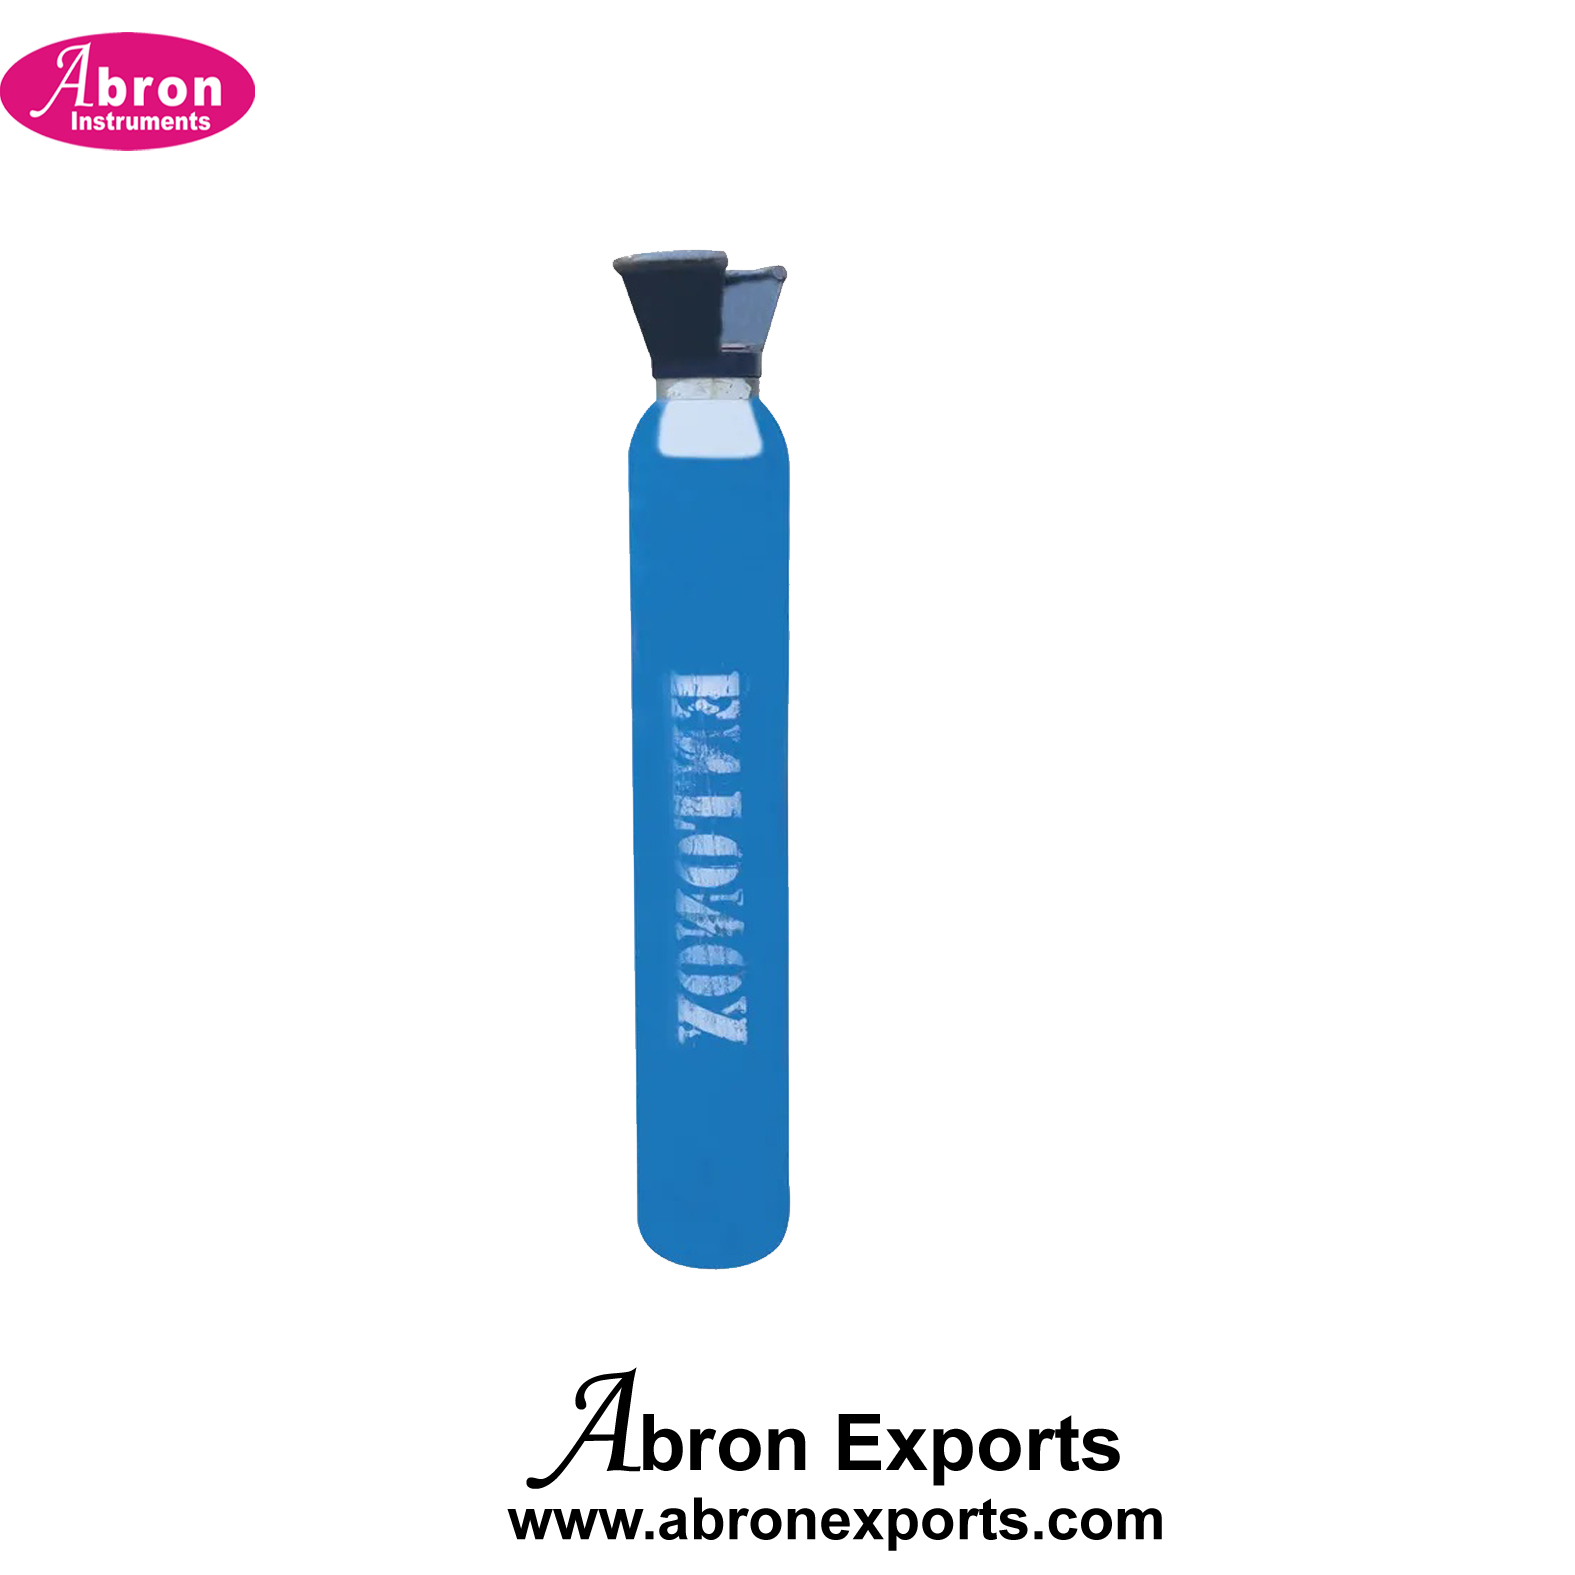 Cylinder ENTONOX 50+50 homogenous gas mixture containing 50 percent nitrous oxide and oxygen by volume compressed in a cylinder Pain releaver Abron ABM-1140B 